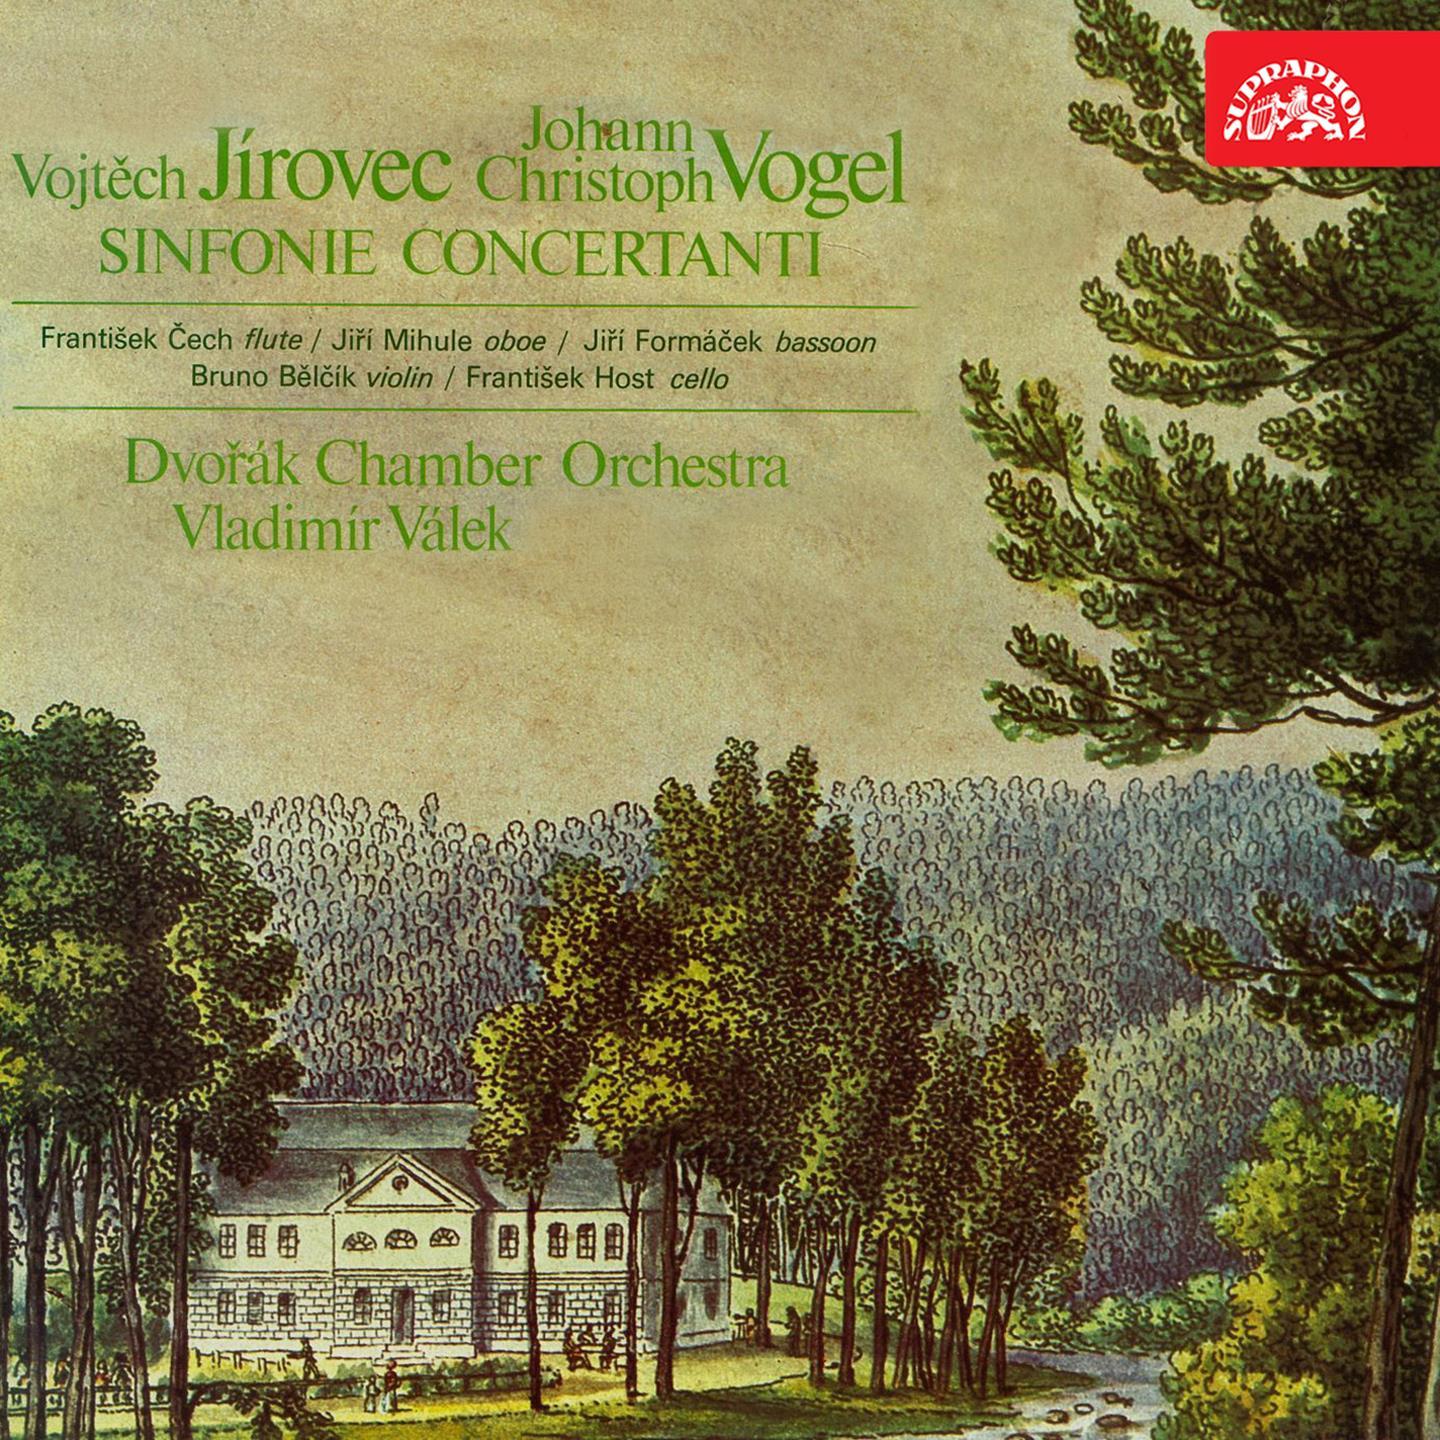 Sinfonia concertante for Flute, Oboe, Bassoon, Violin, Cello and Orchestra, Op. 34: III. Rondo